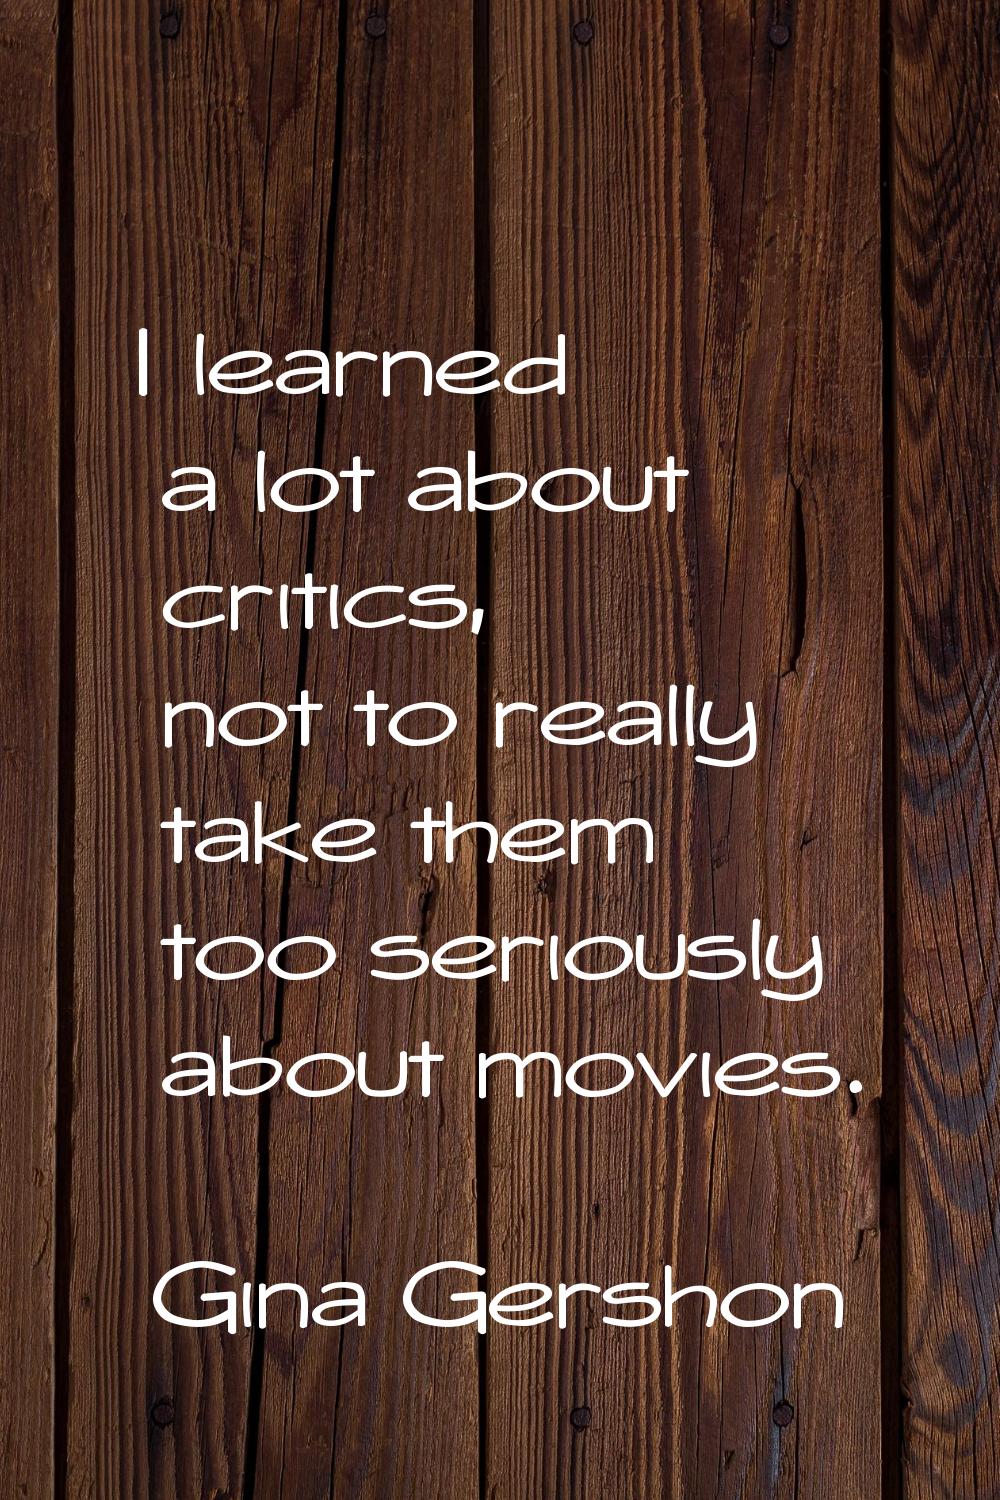 I learned a lot about critics, not to really take them too seriously about movies.